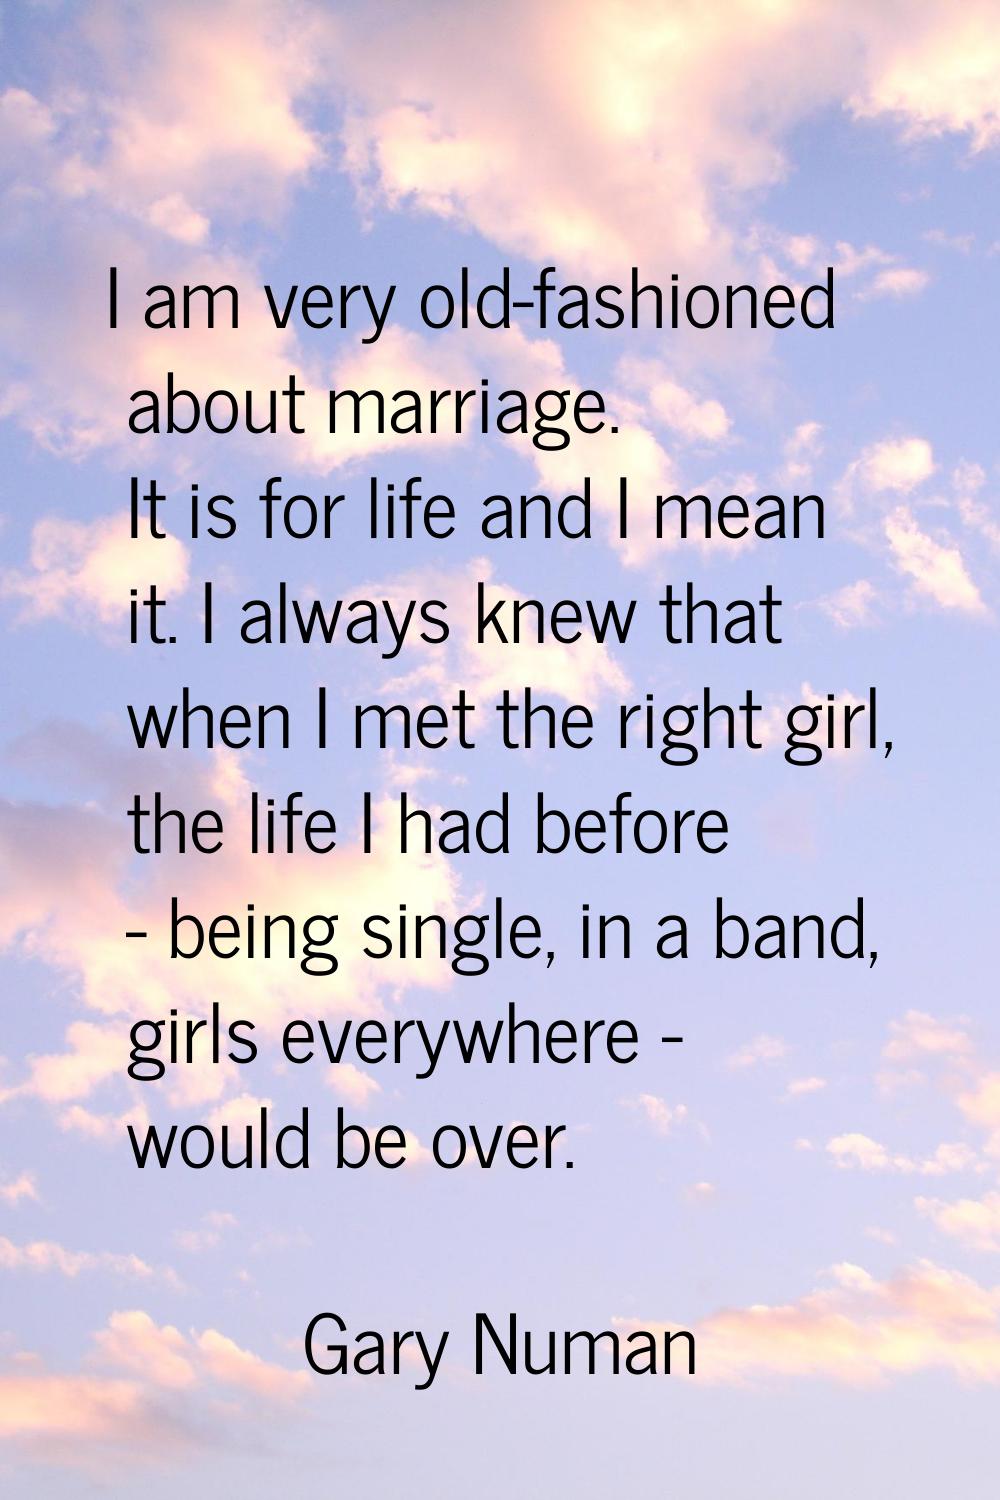 I am very old-fashioned about marriage. It is for life and I mean it. I always knew that when I met